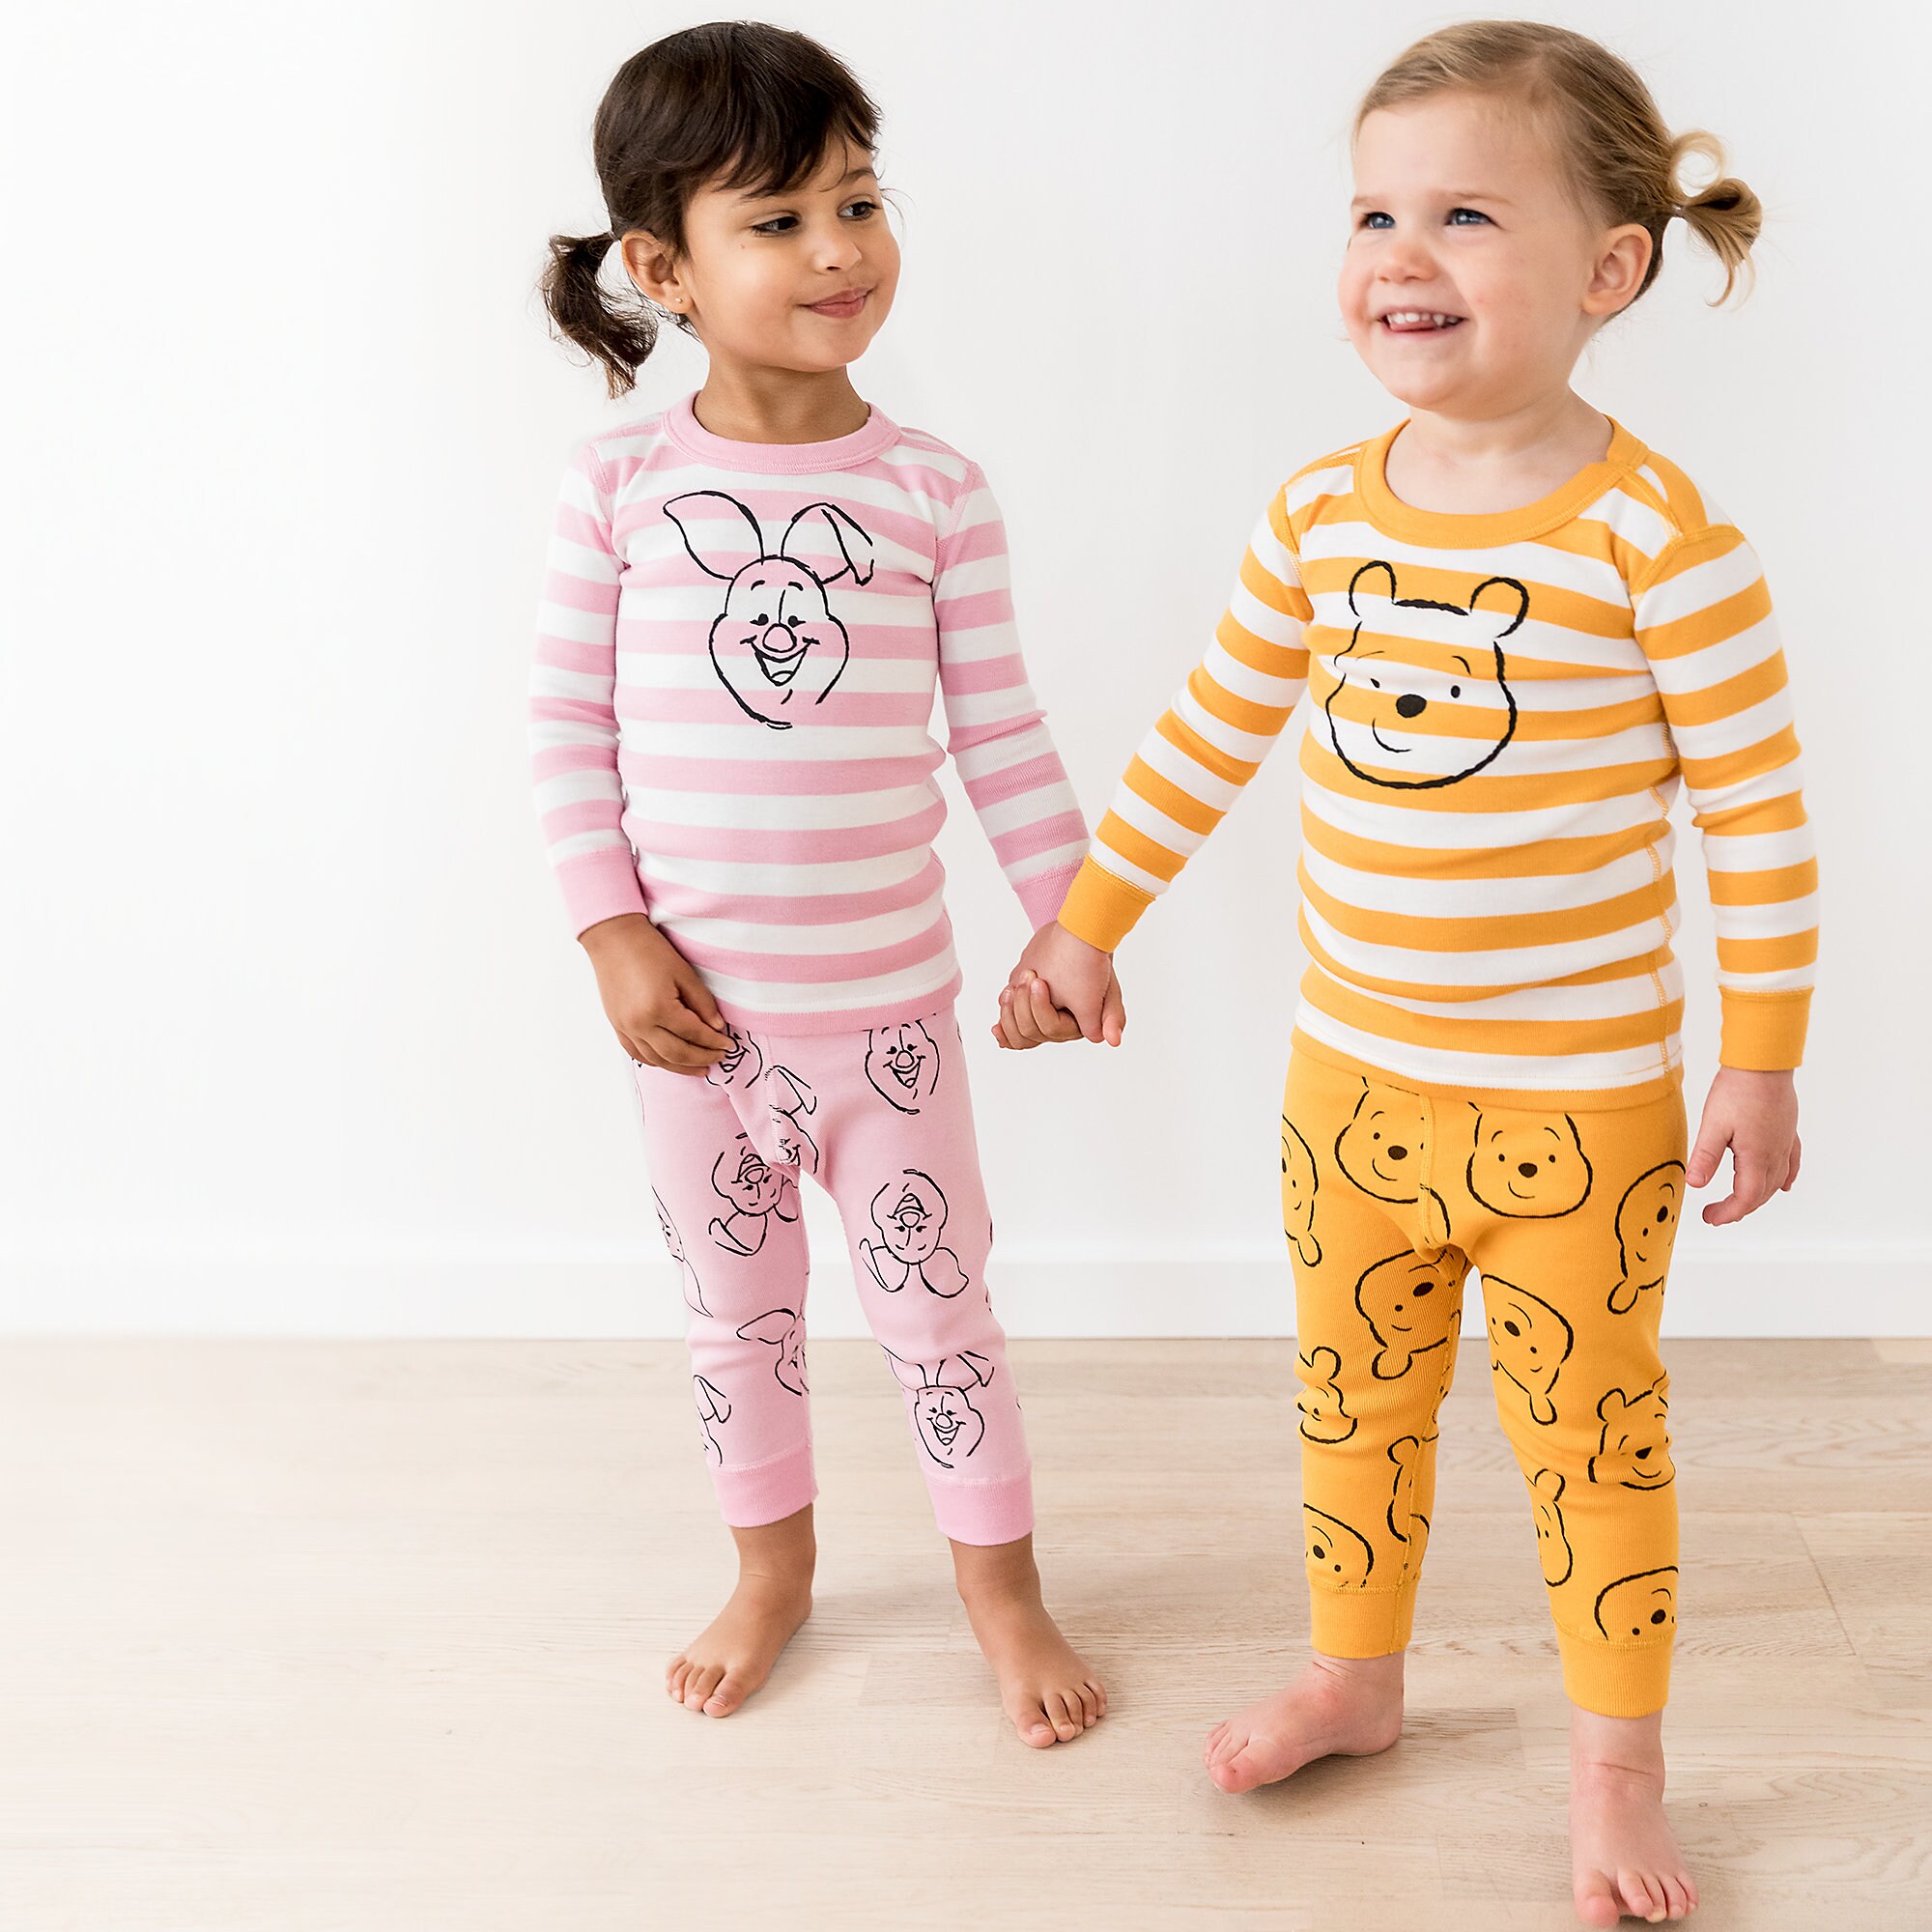 Winnie the Pooh Organic Long John Pajama Set for Baby by Hanna Andersson